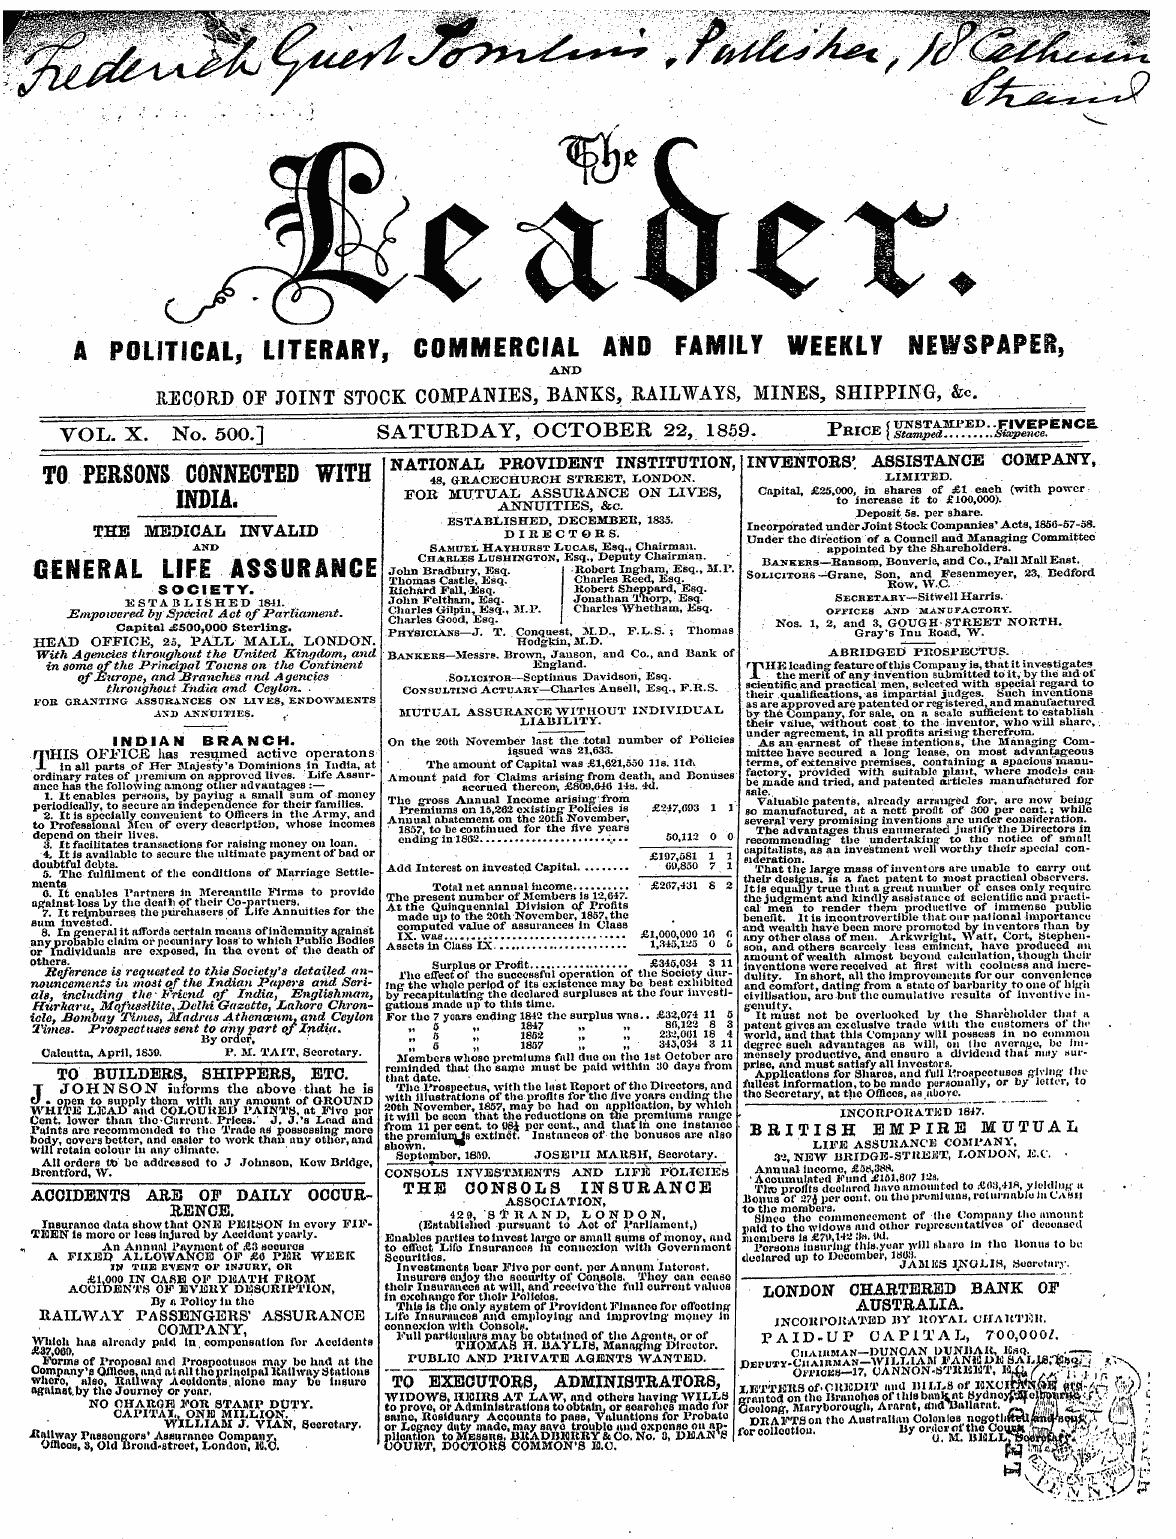 Leader (1850-1860): jS F Y, 2nd edition - To Persons Connected With India.